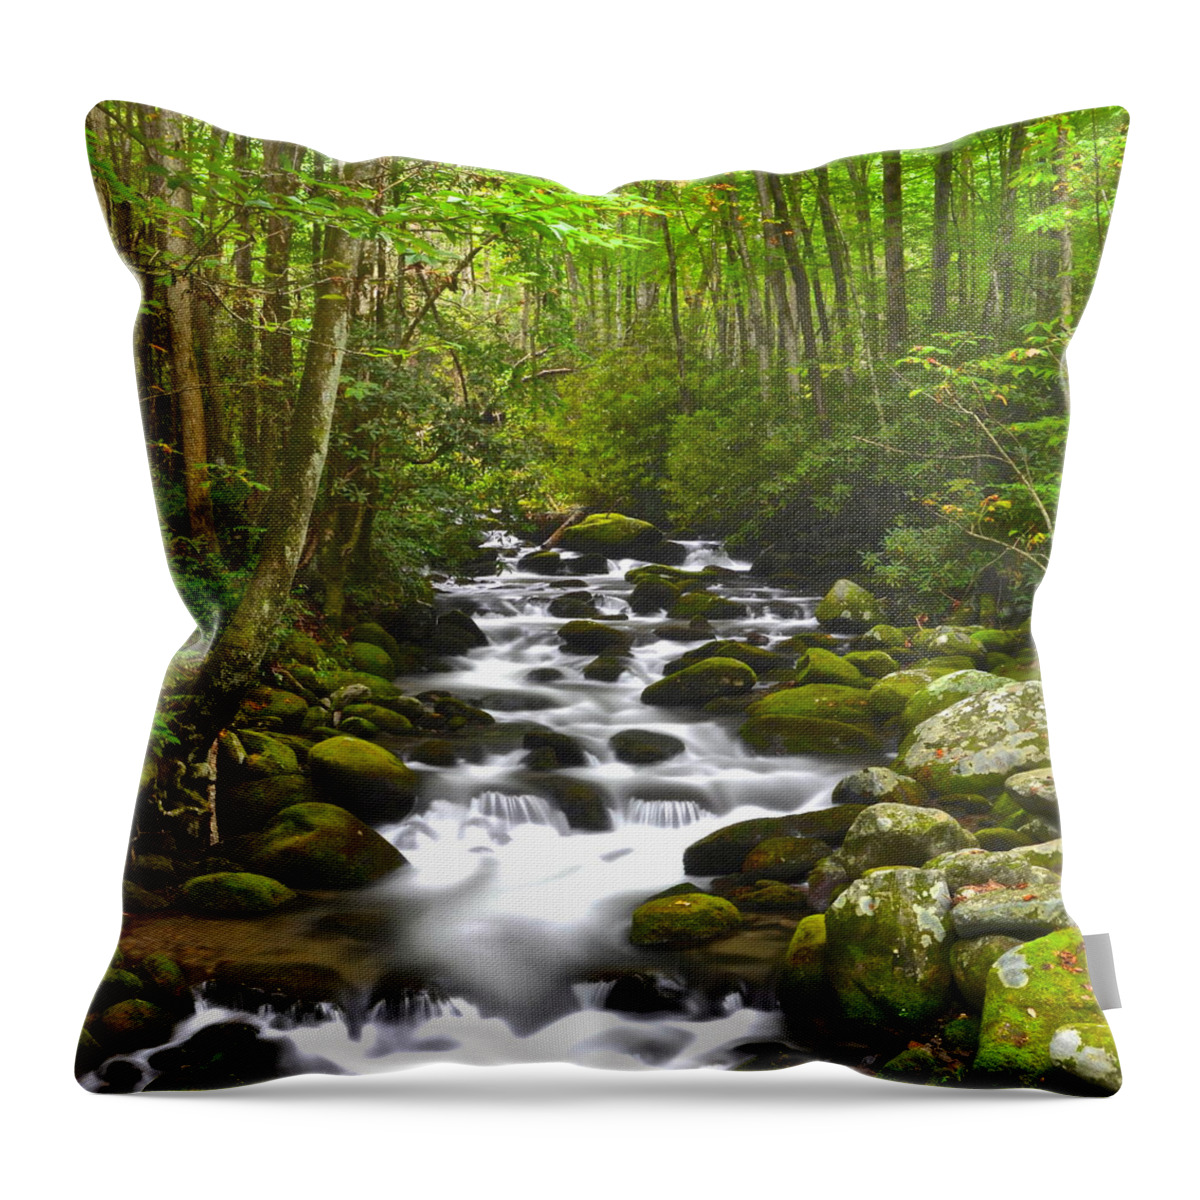 Square Throw Pillow featuring the photograph Smoky Mountain Stream #2 by Frozen in Time Fine Art Photography